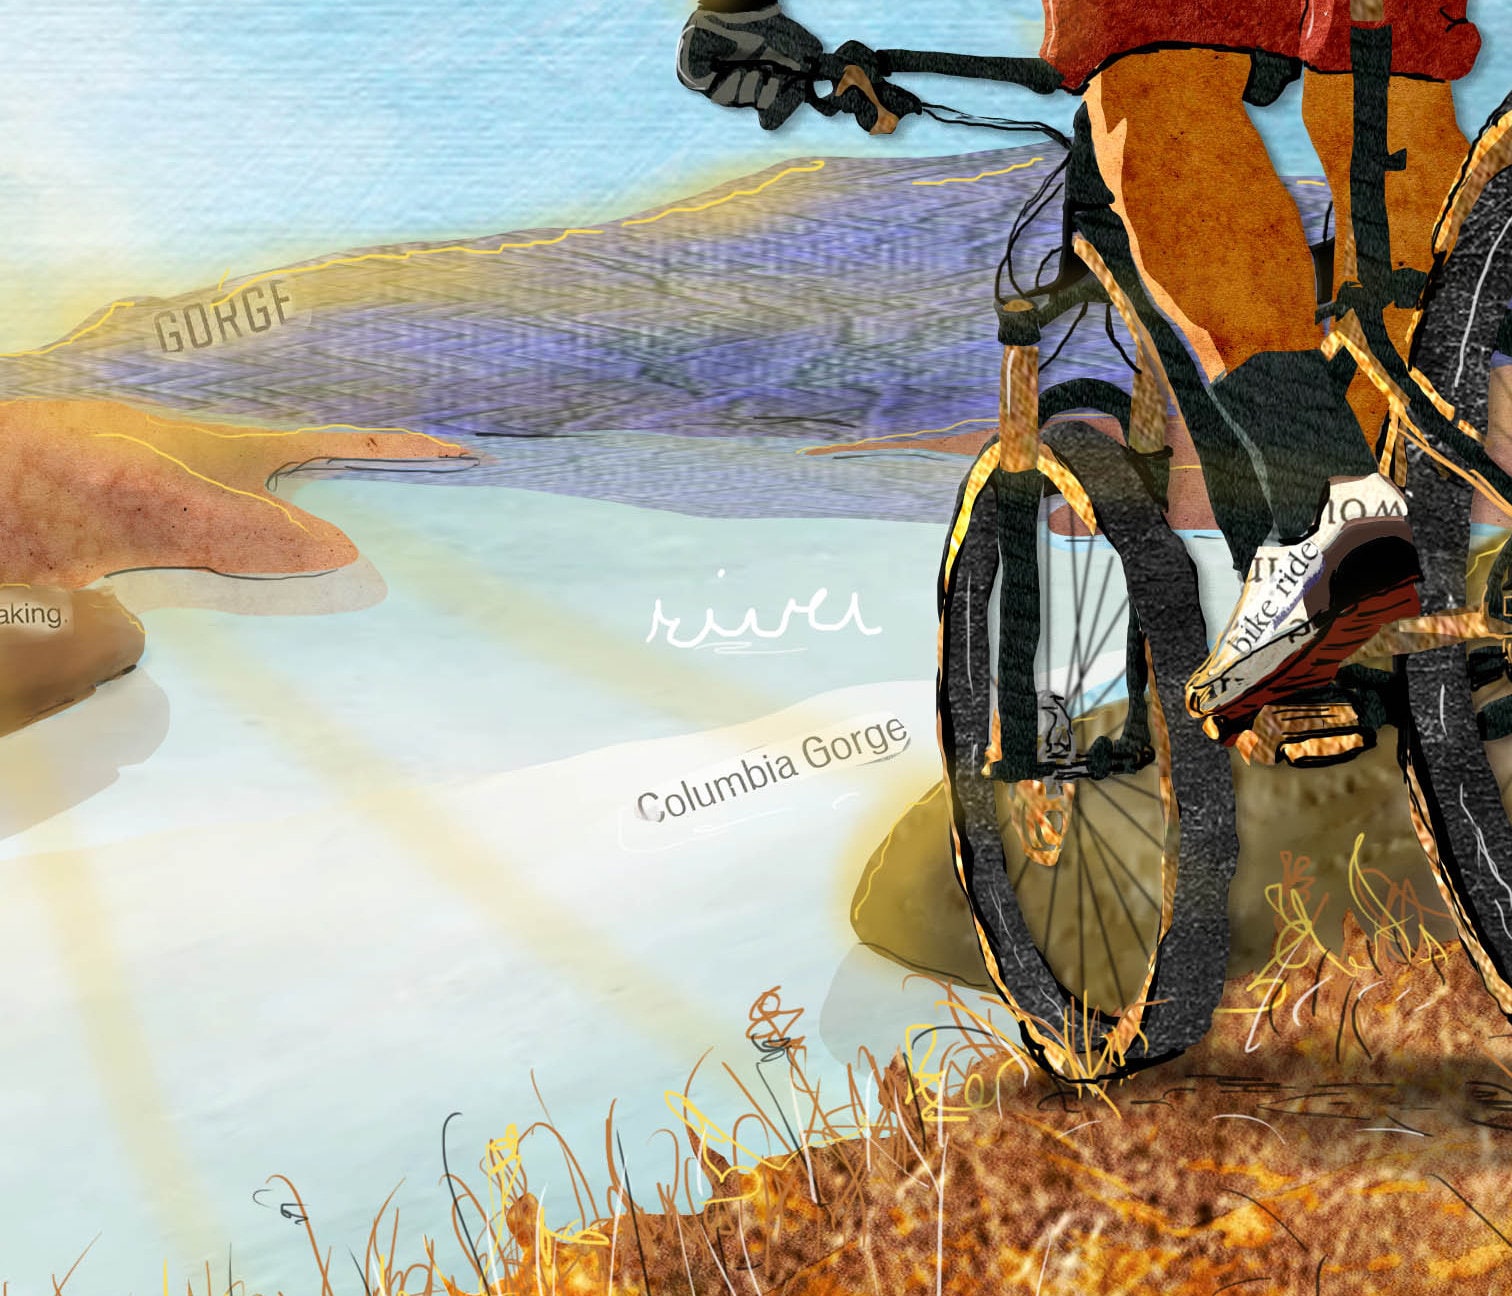 8x10 Art Print of a mixed media collage of a mountain biker looking over the Columbia River Gorge, sunset, vista